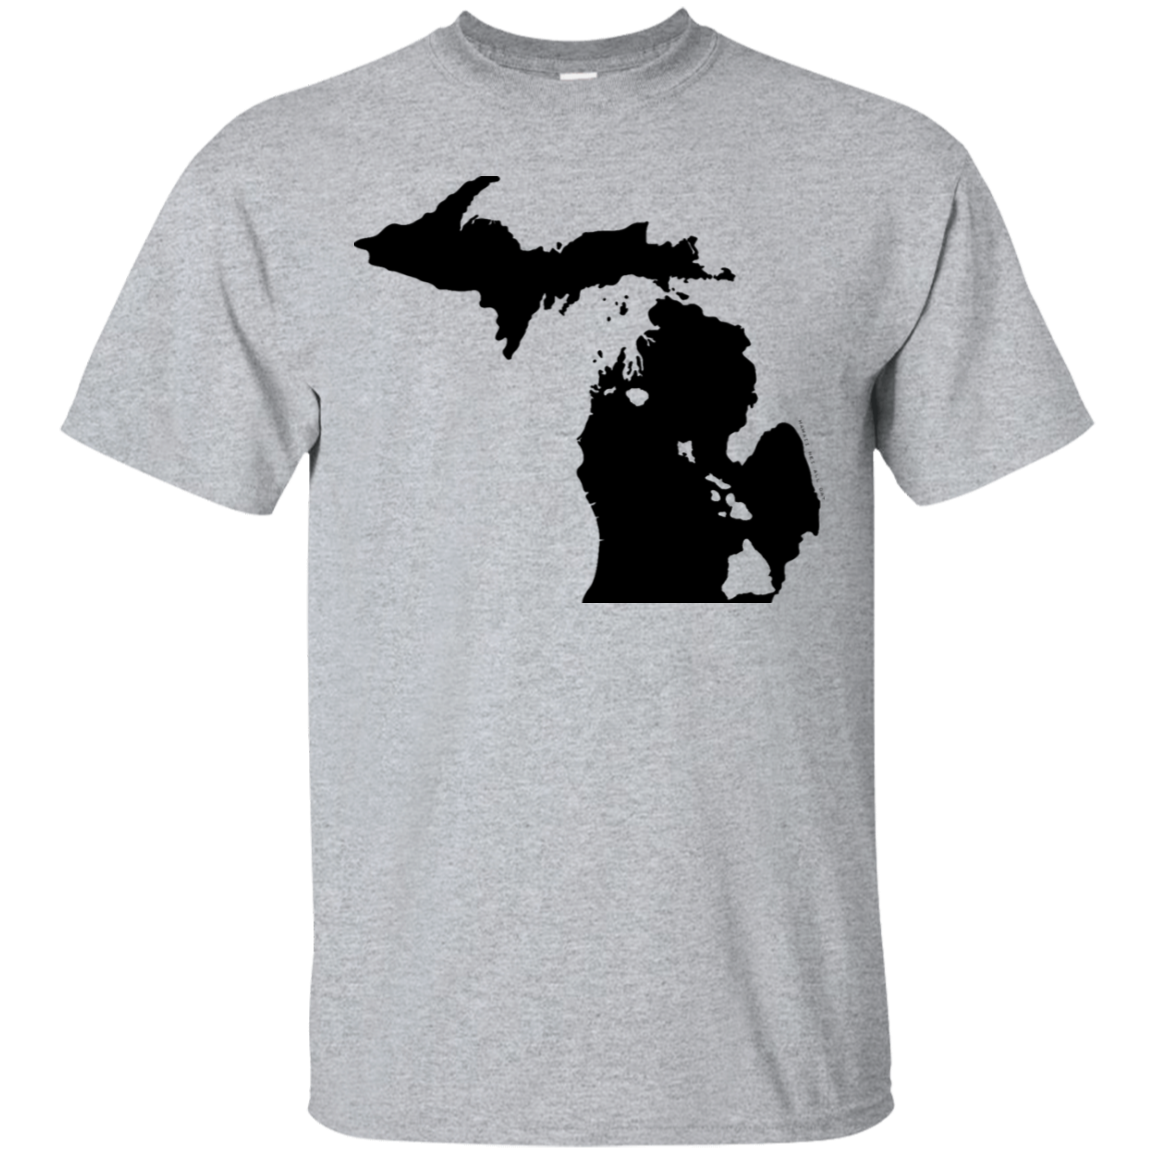 Living in Michigan with Hawaii Roots Ultra Cotton T-Shirt, T-Shirts, Hawaii Nei All Day